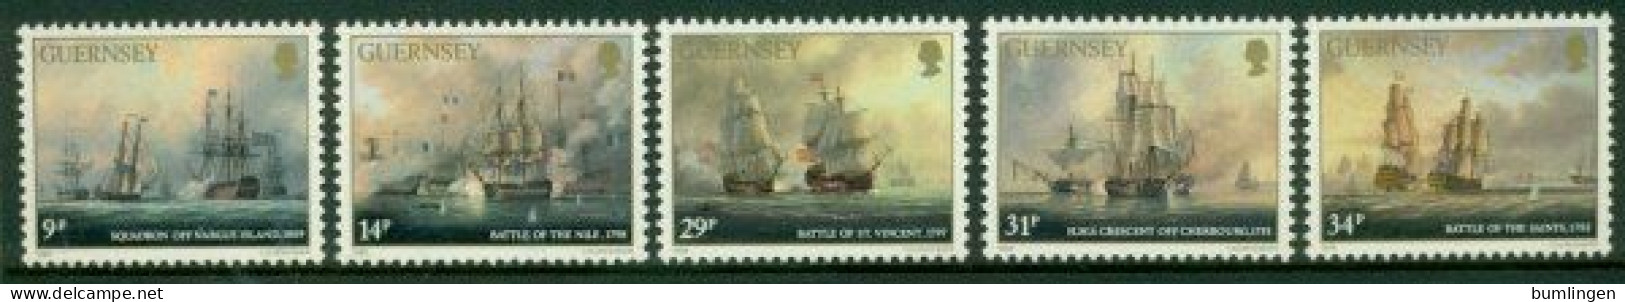 GUERNSEY 1986 Mi 352-56** 150th Anniversary Of The Death Of Admiral Lord James De Saumarez [B452] - Militares